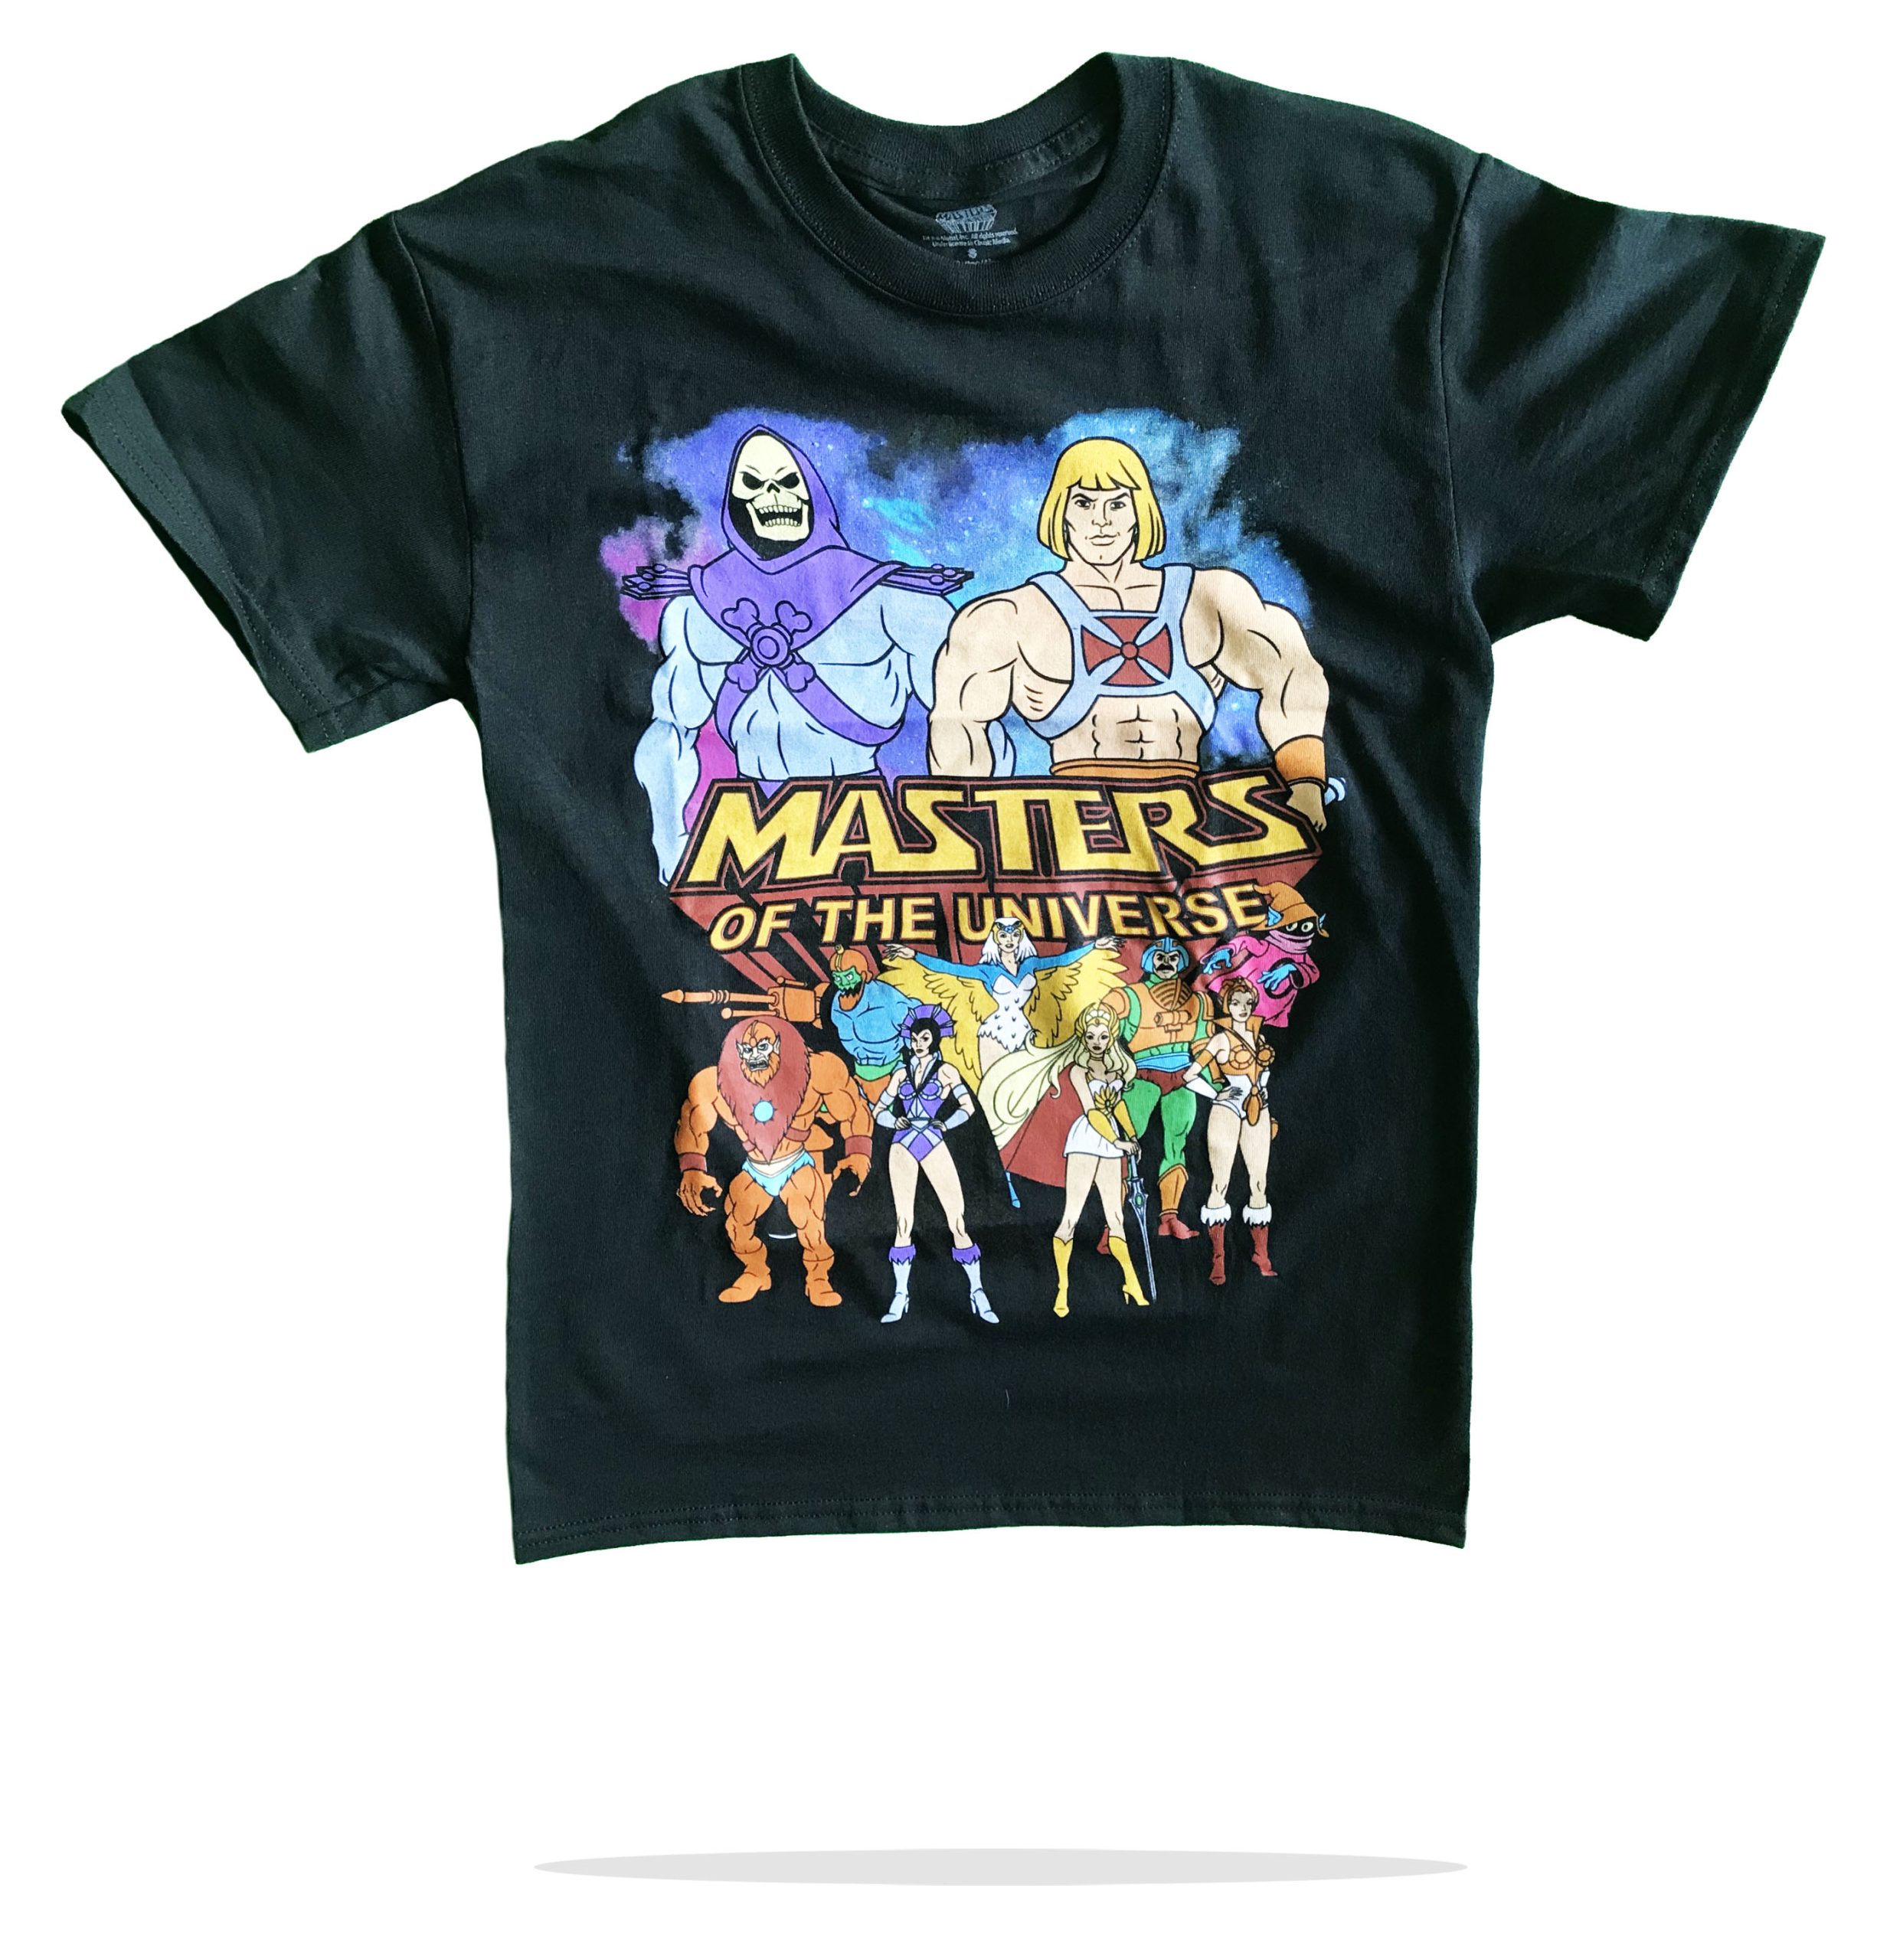 Masters of the universe Tee